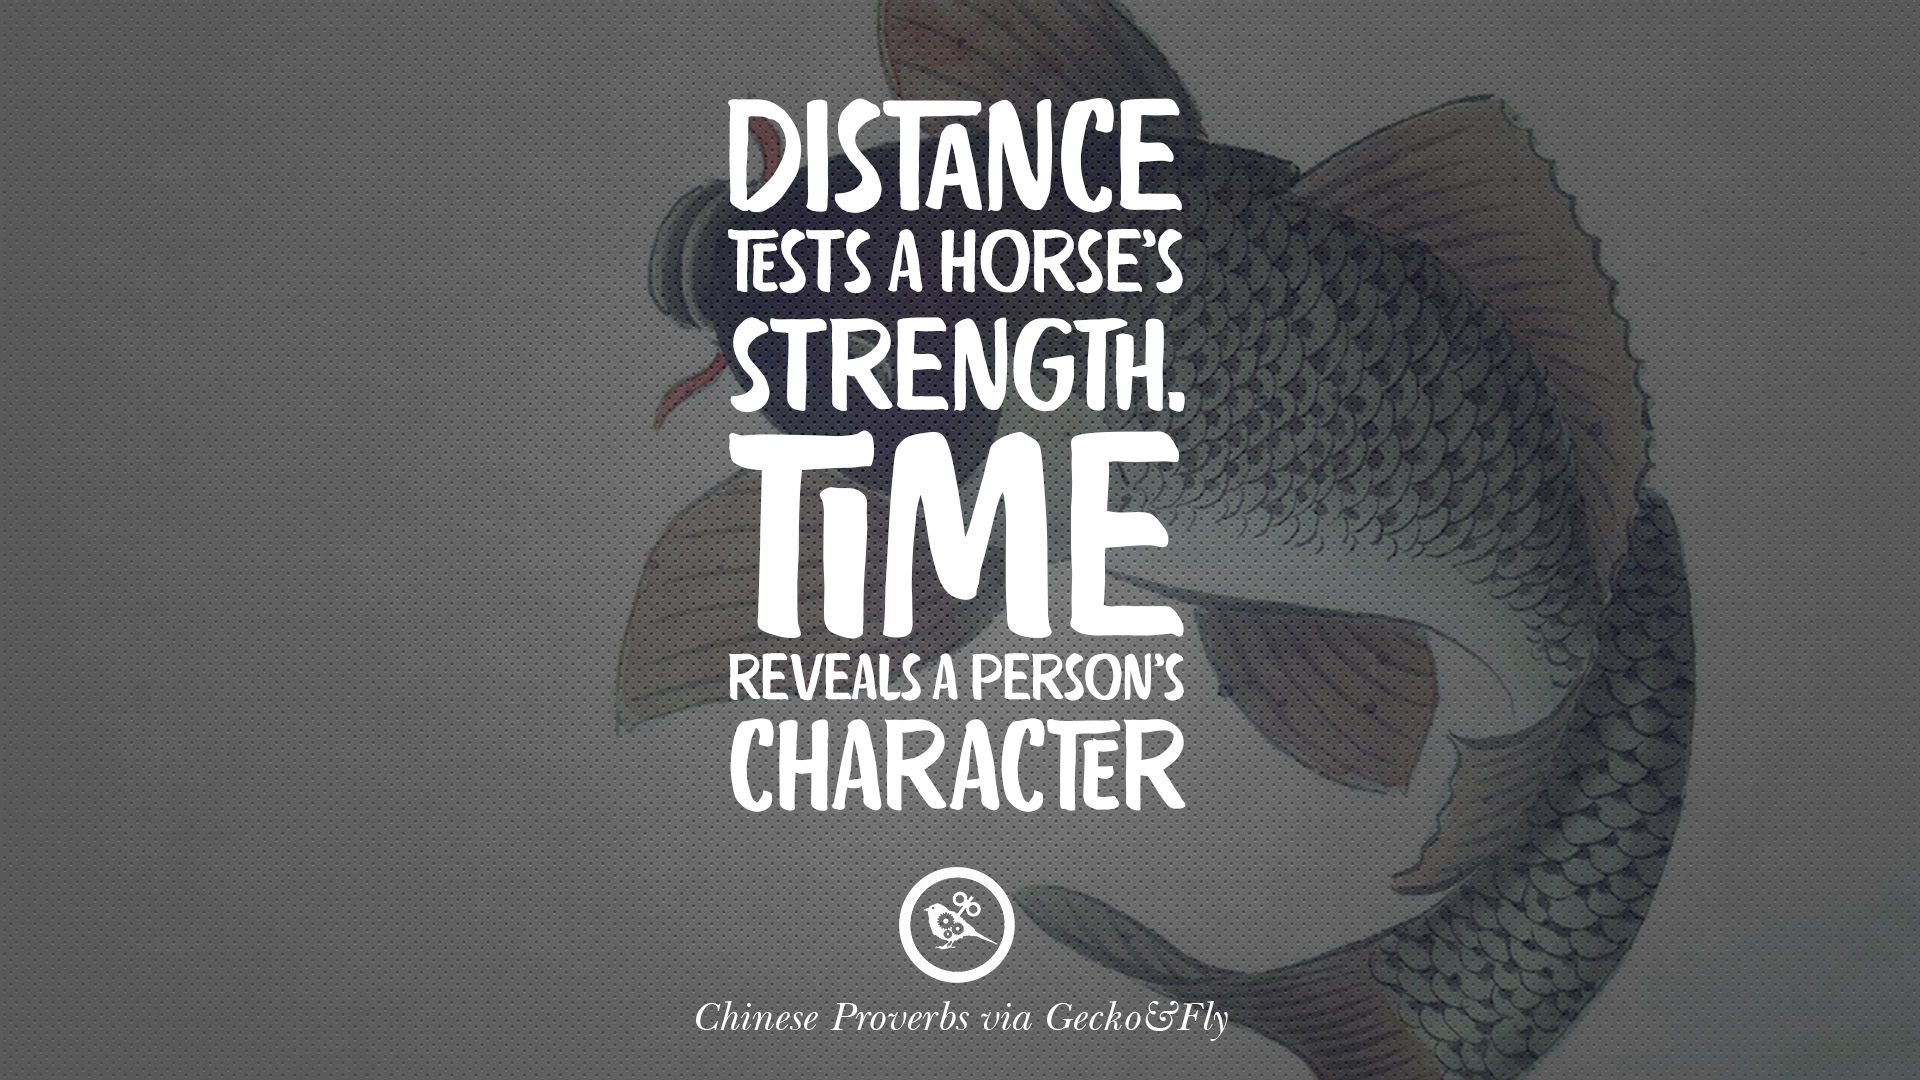 Ancient Chinese Proverbs and Distance tests a horse s strength Time reveals a person s character